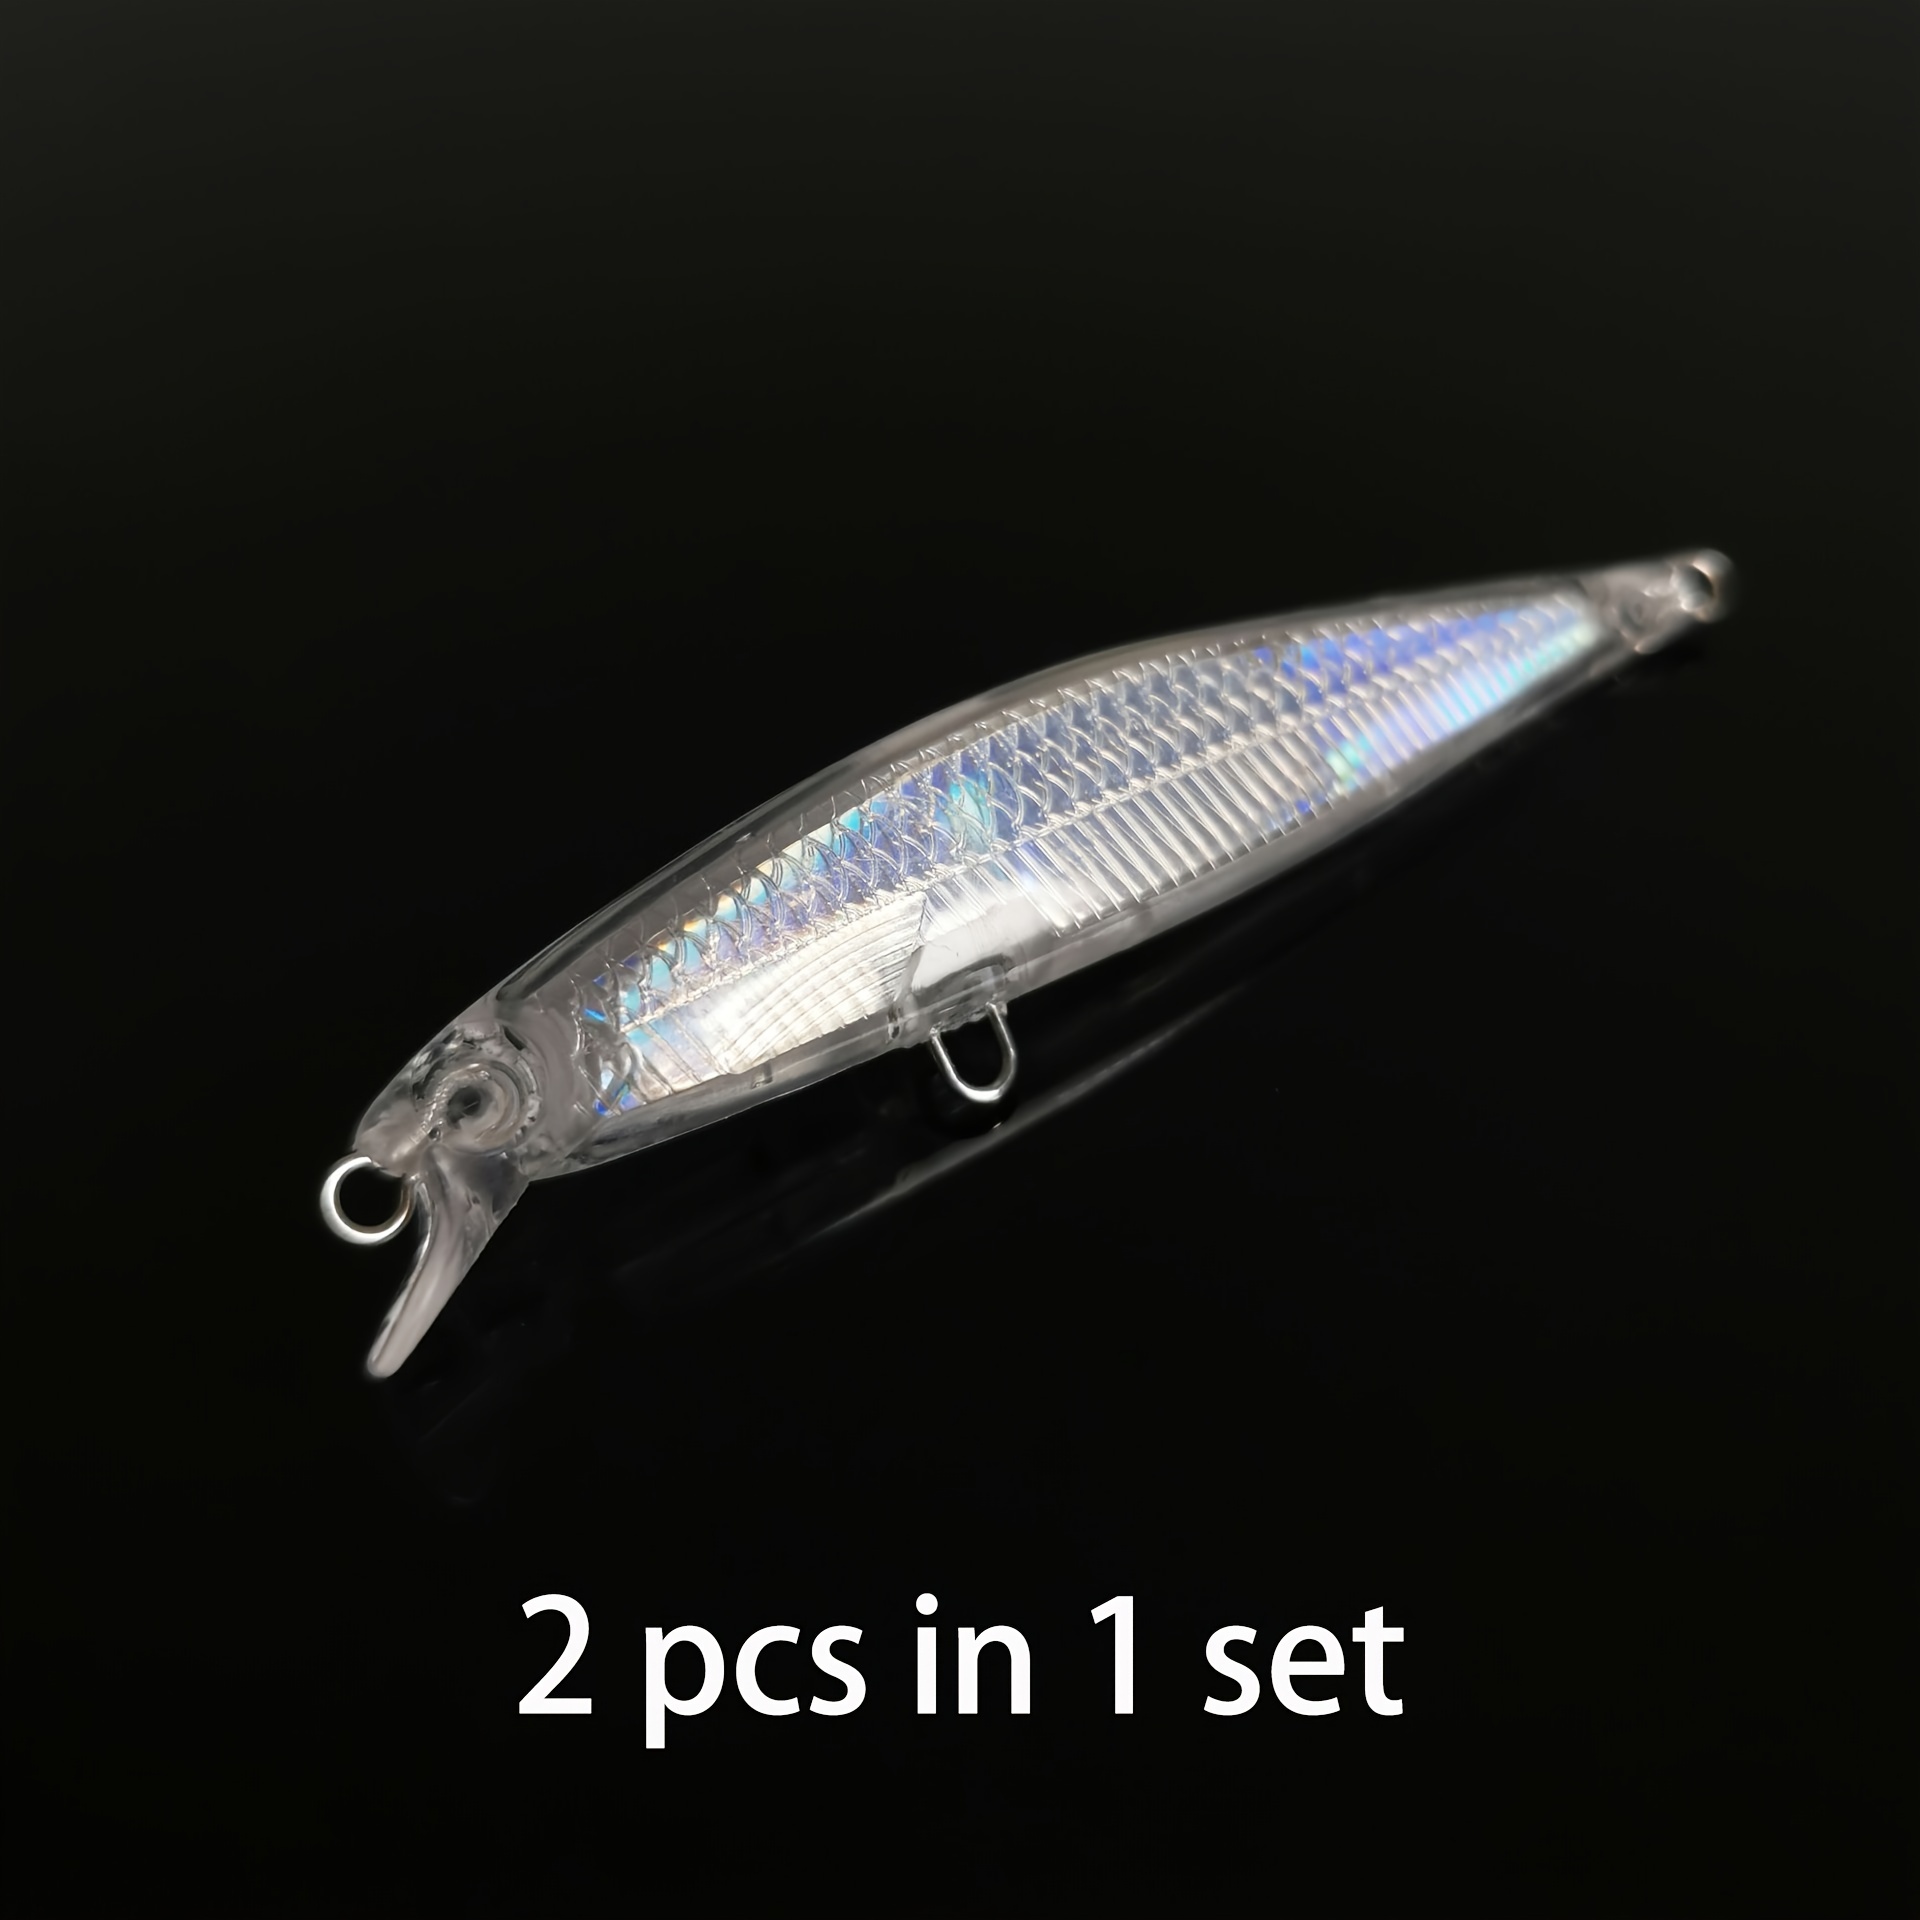 2pcs Lifelike Reflective Minnow Lure Kit for Bass Trout Fishing - DIY  Artificial Bionic Bait for Freshwater and Saltwater